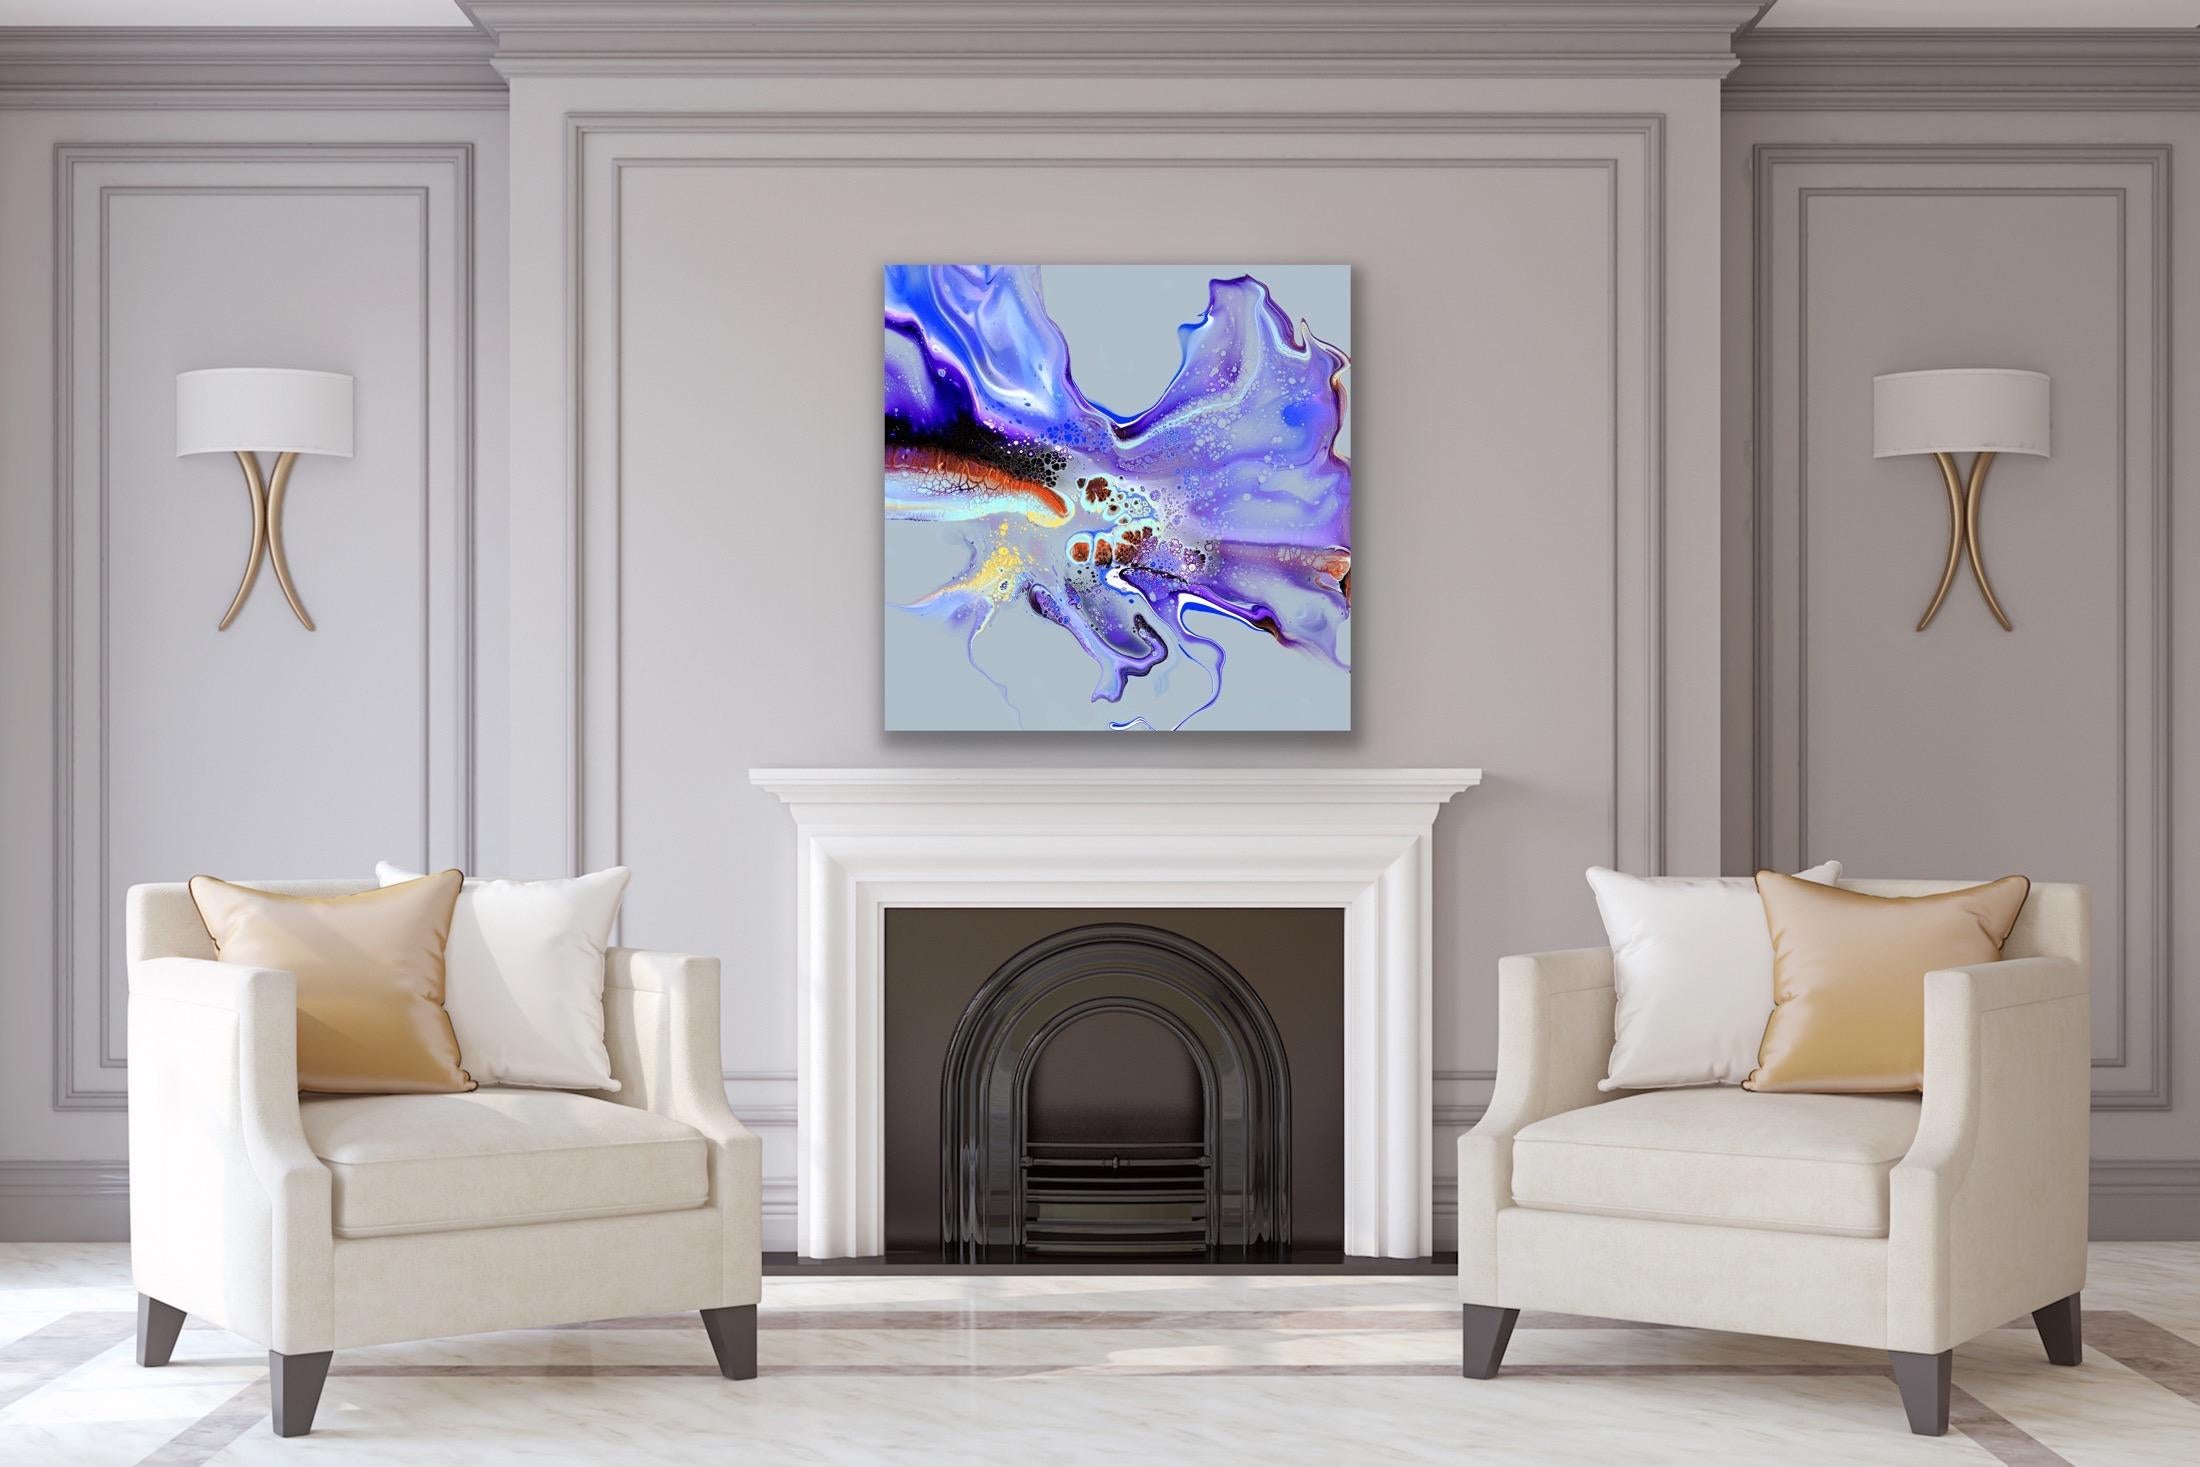 Modern Wall Art, Contemporary Decor, Large Indoor Outdoor Giclee Print on Metal - Purple Abstract Painting by Celeste Reiter